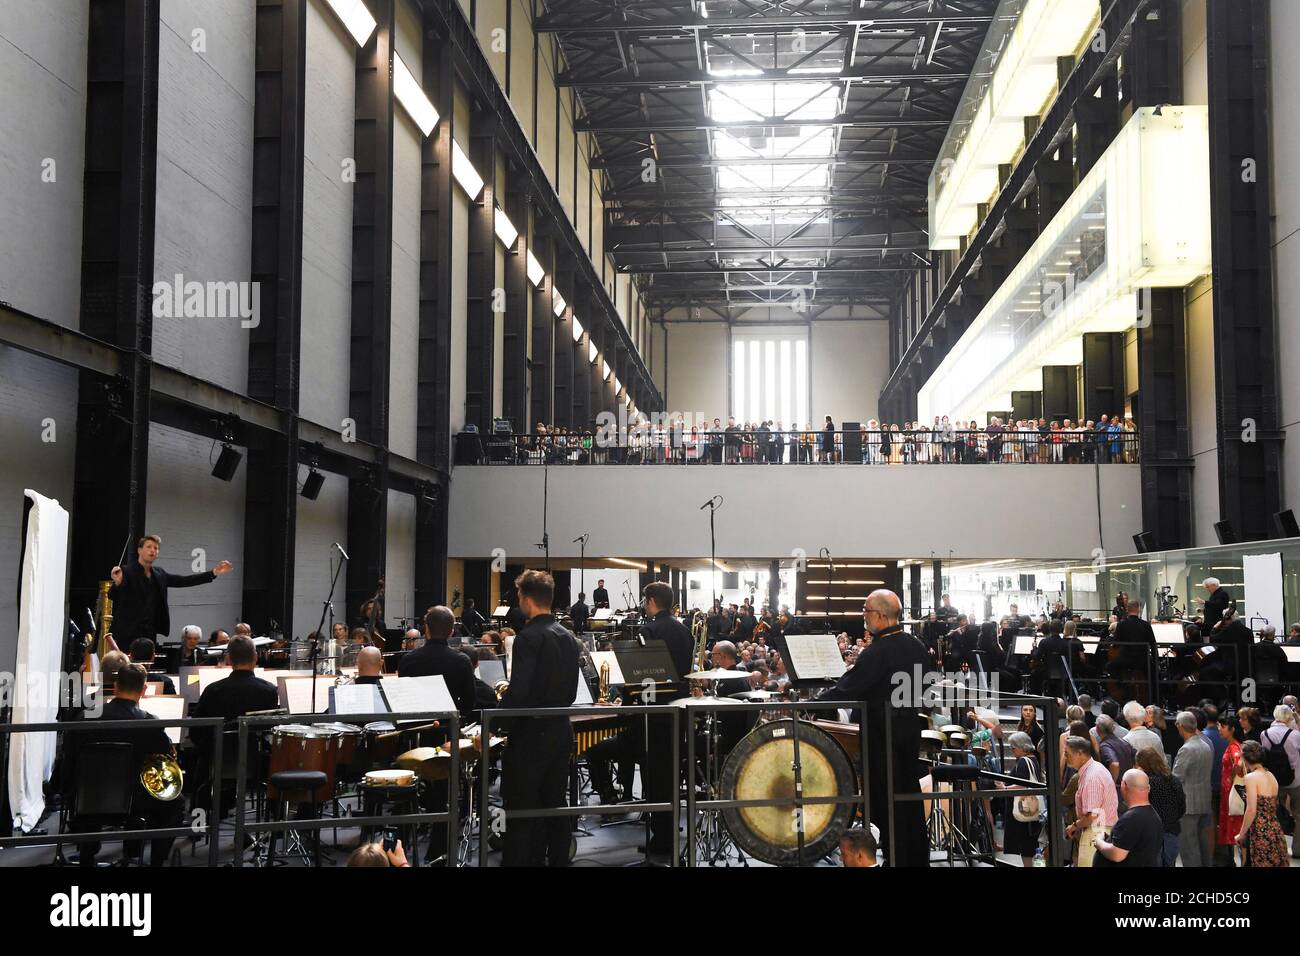 Sir Simon Rattle, Matthias Pintscher and Duncan Ward conduct the London Symphony Orchestra as they perform Stockhausen's Gruppen for three Orchestras in Tate Modern's Turbine Hall, London. Stock Photo